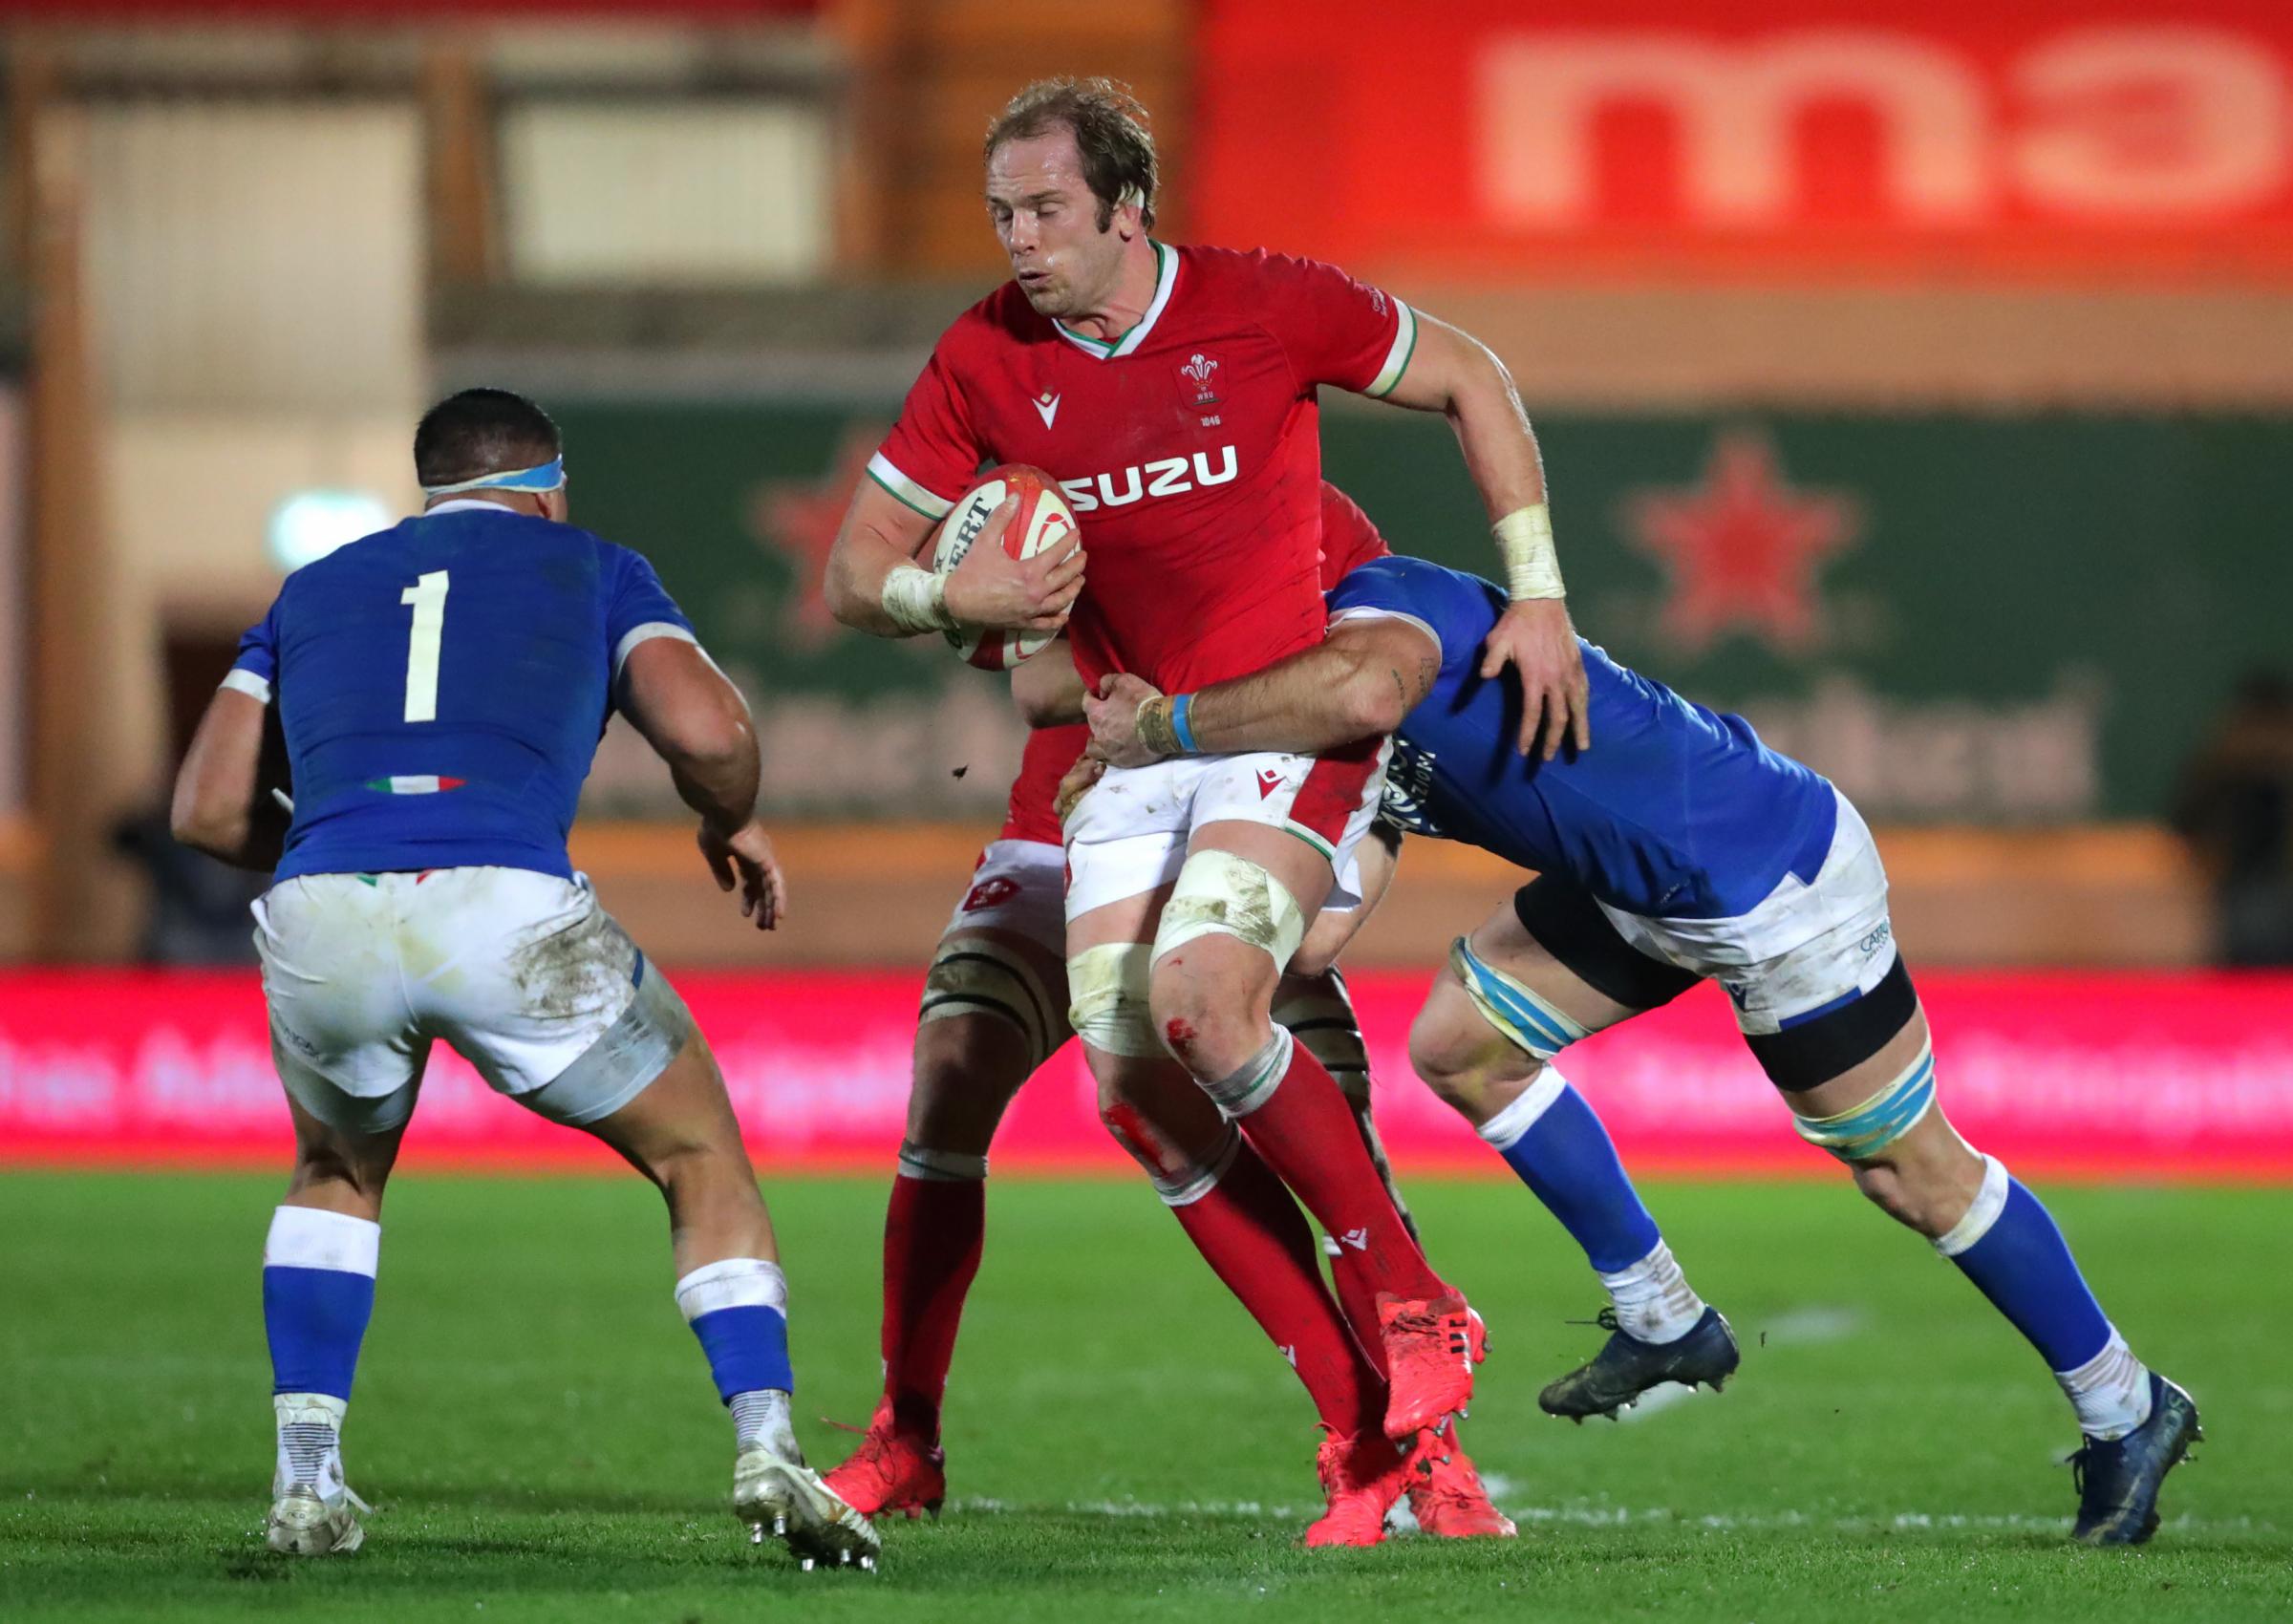 Wales Alun Wyn Jones tackled by Italys Braam Steyn during the Autumn Nations Cup match at Parc y Scarlets, Llanelli.